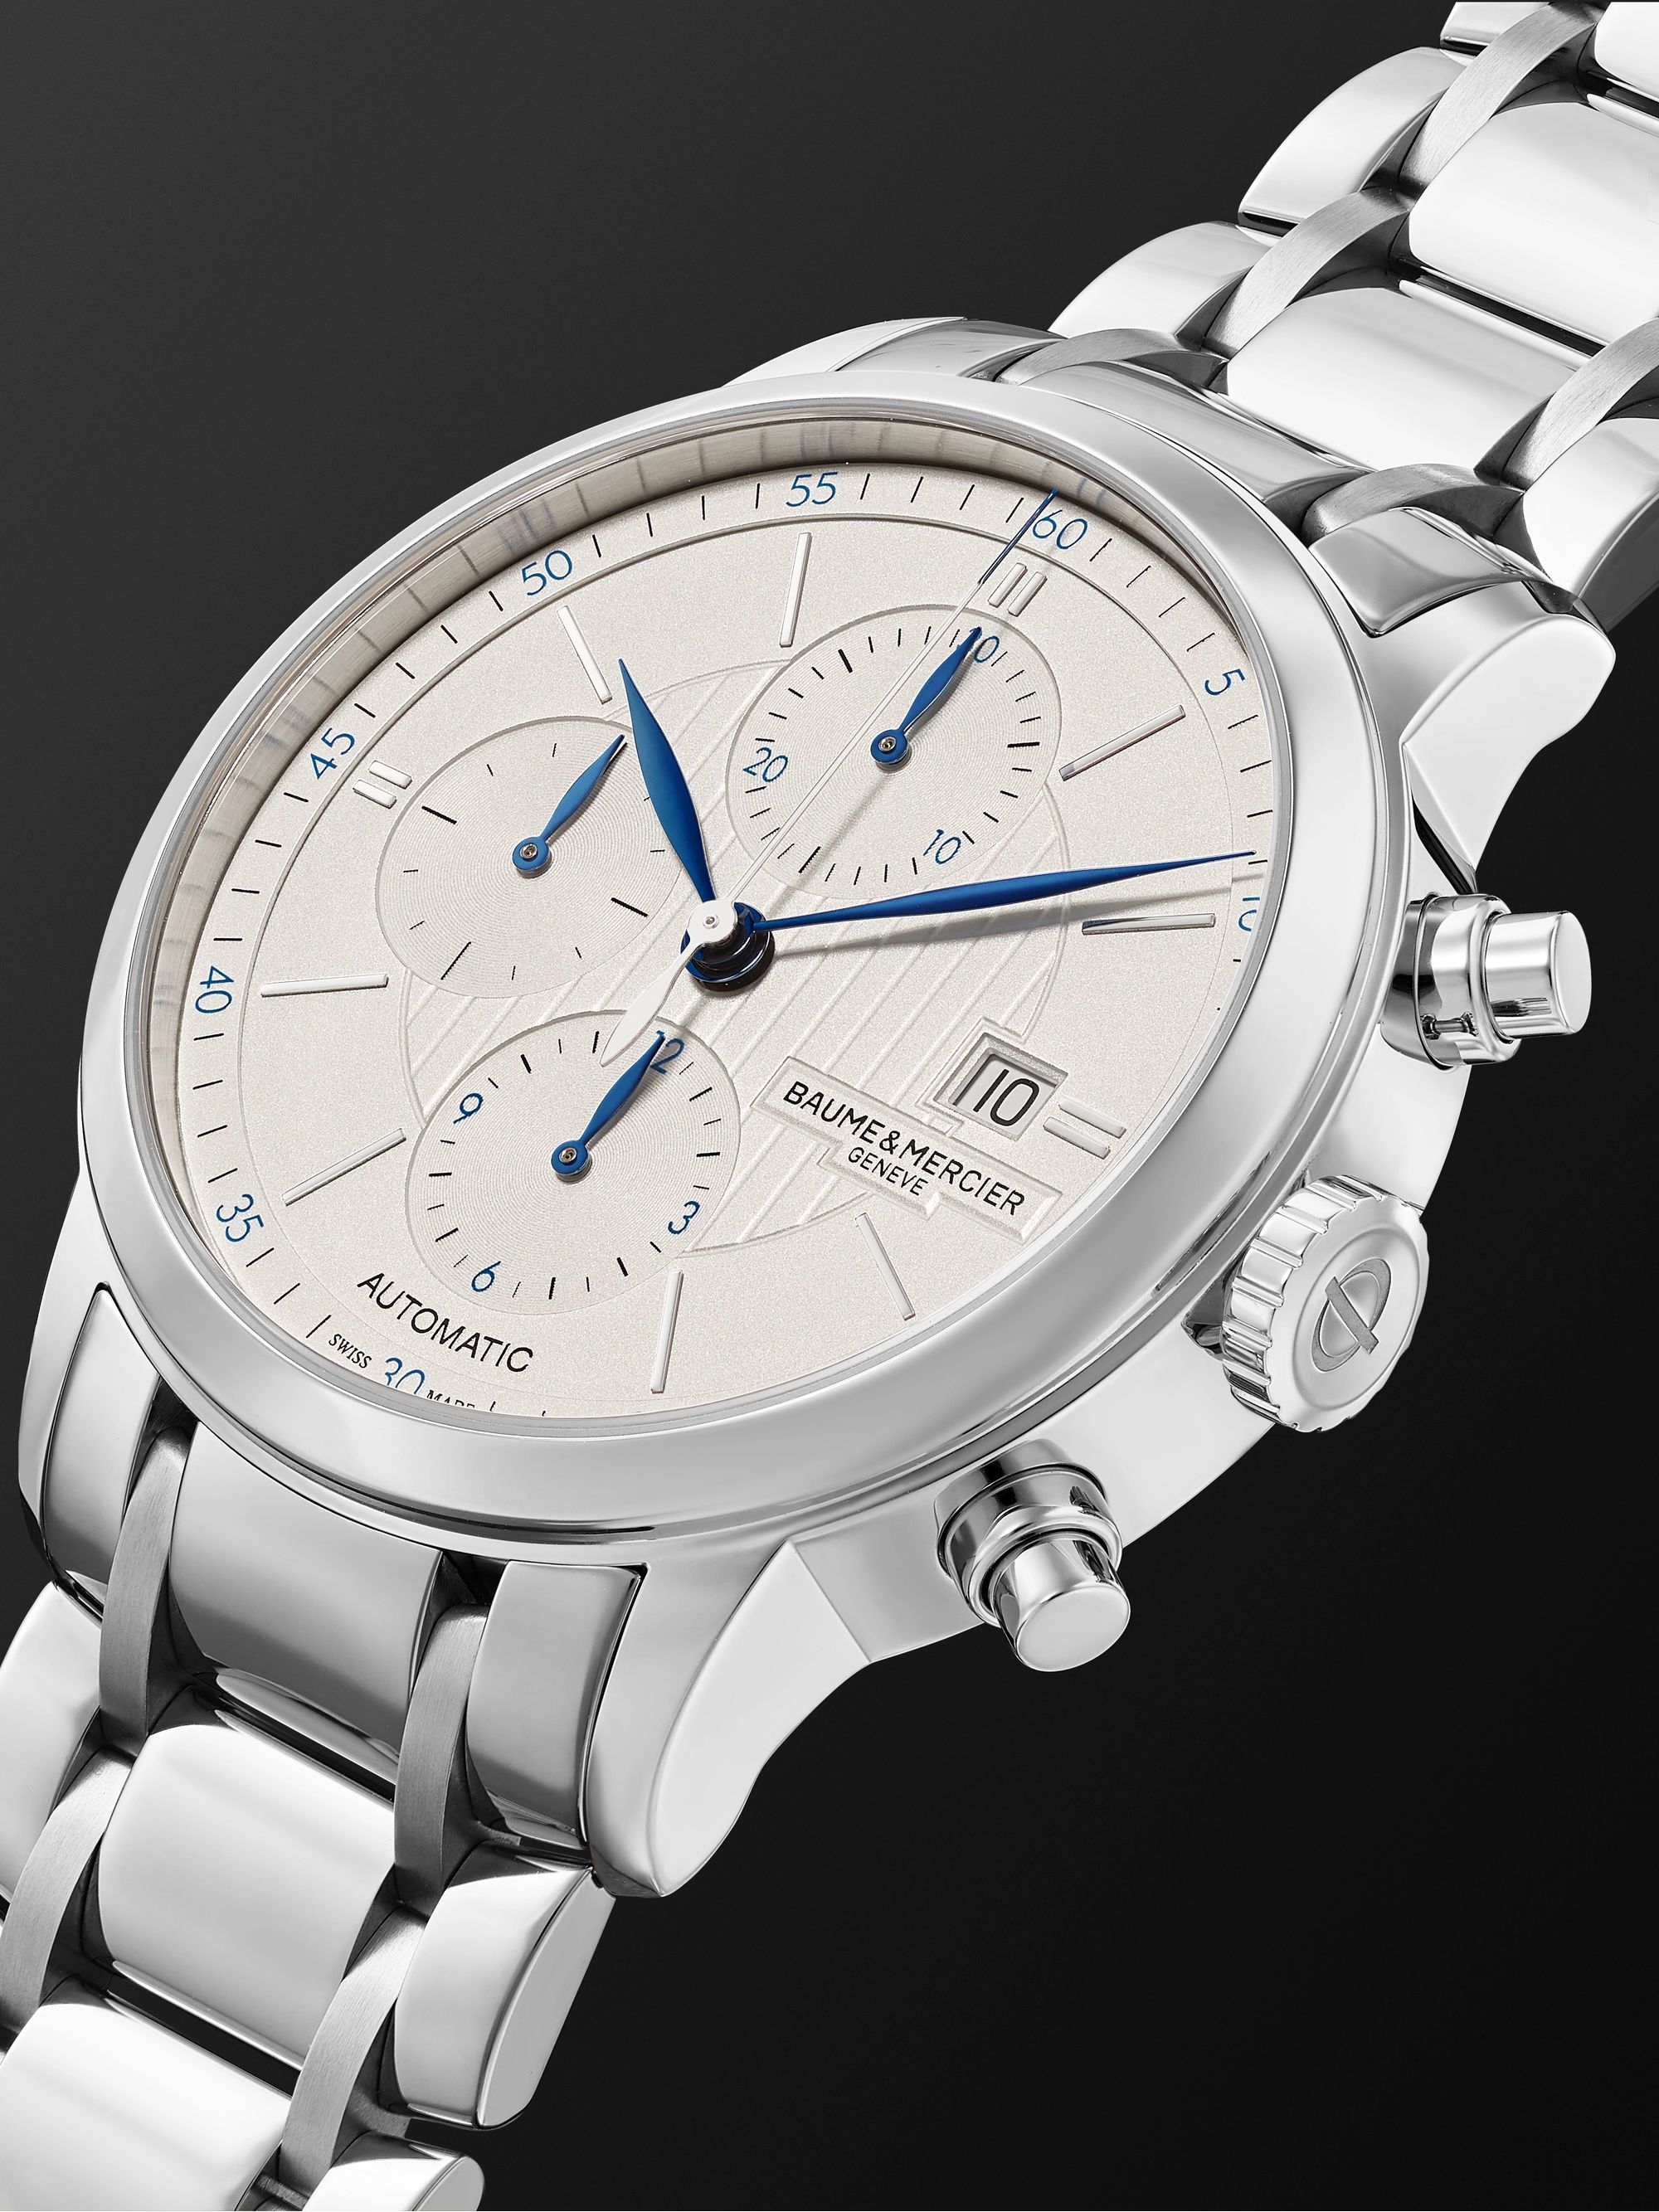 BAUME & MERCIER Classima Automatic Chronograph 42mm Stainless Steel Watch, Ref. No. M0A10331